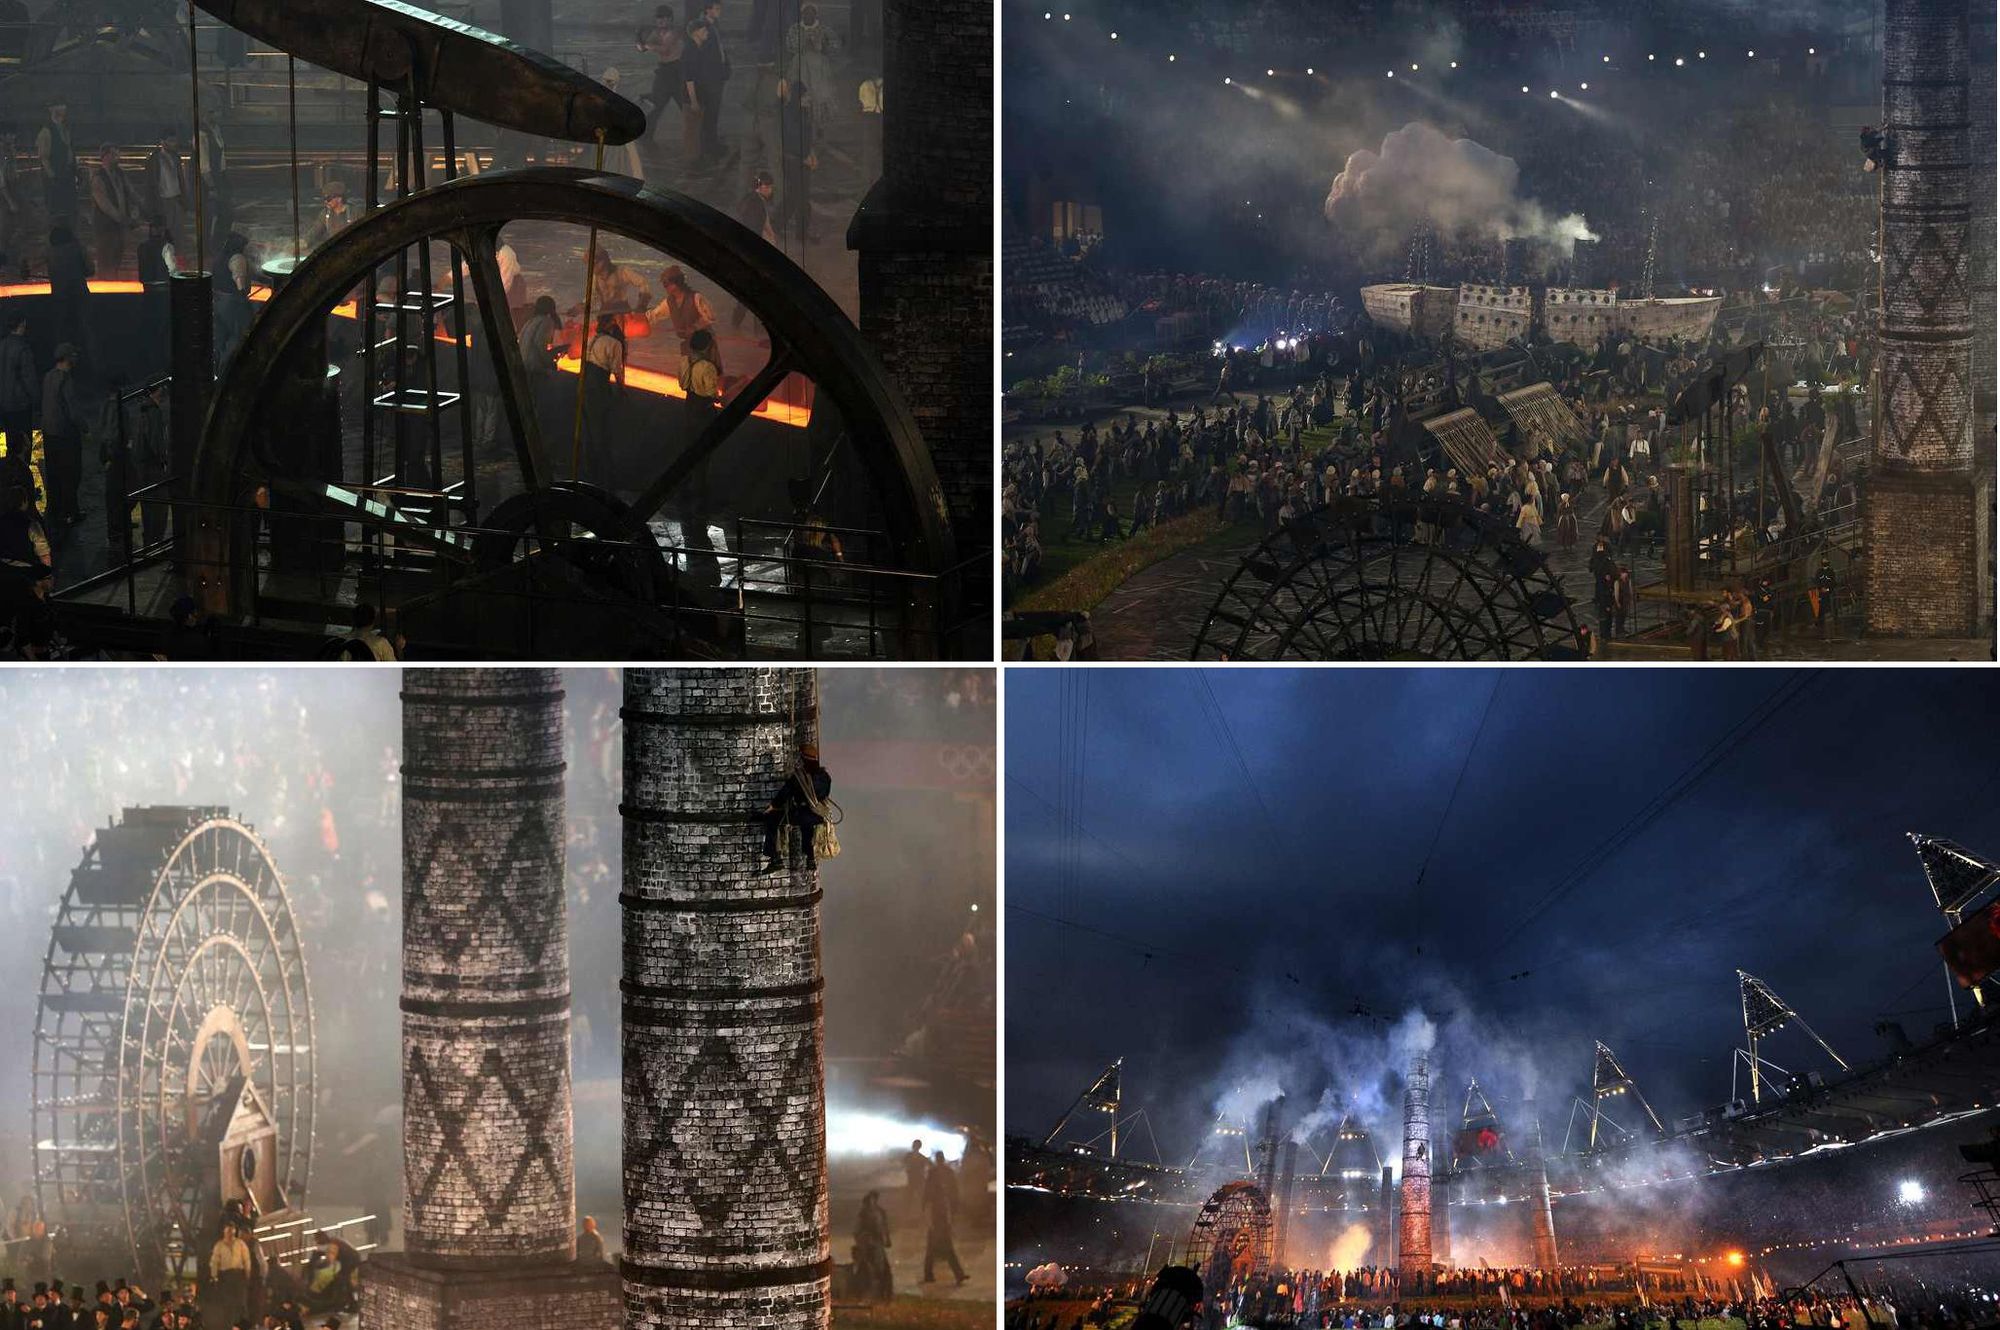 The Industrial Revolution sequence at the London 2012 Olympics Opening Ceremony